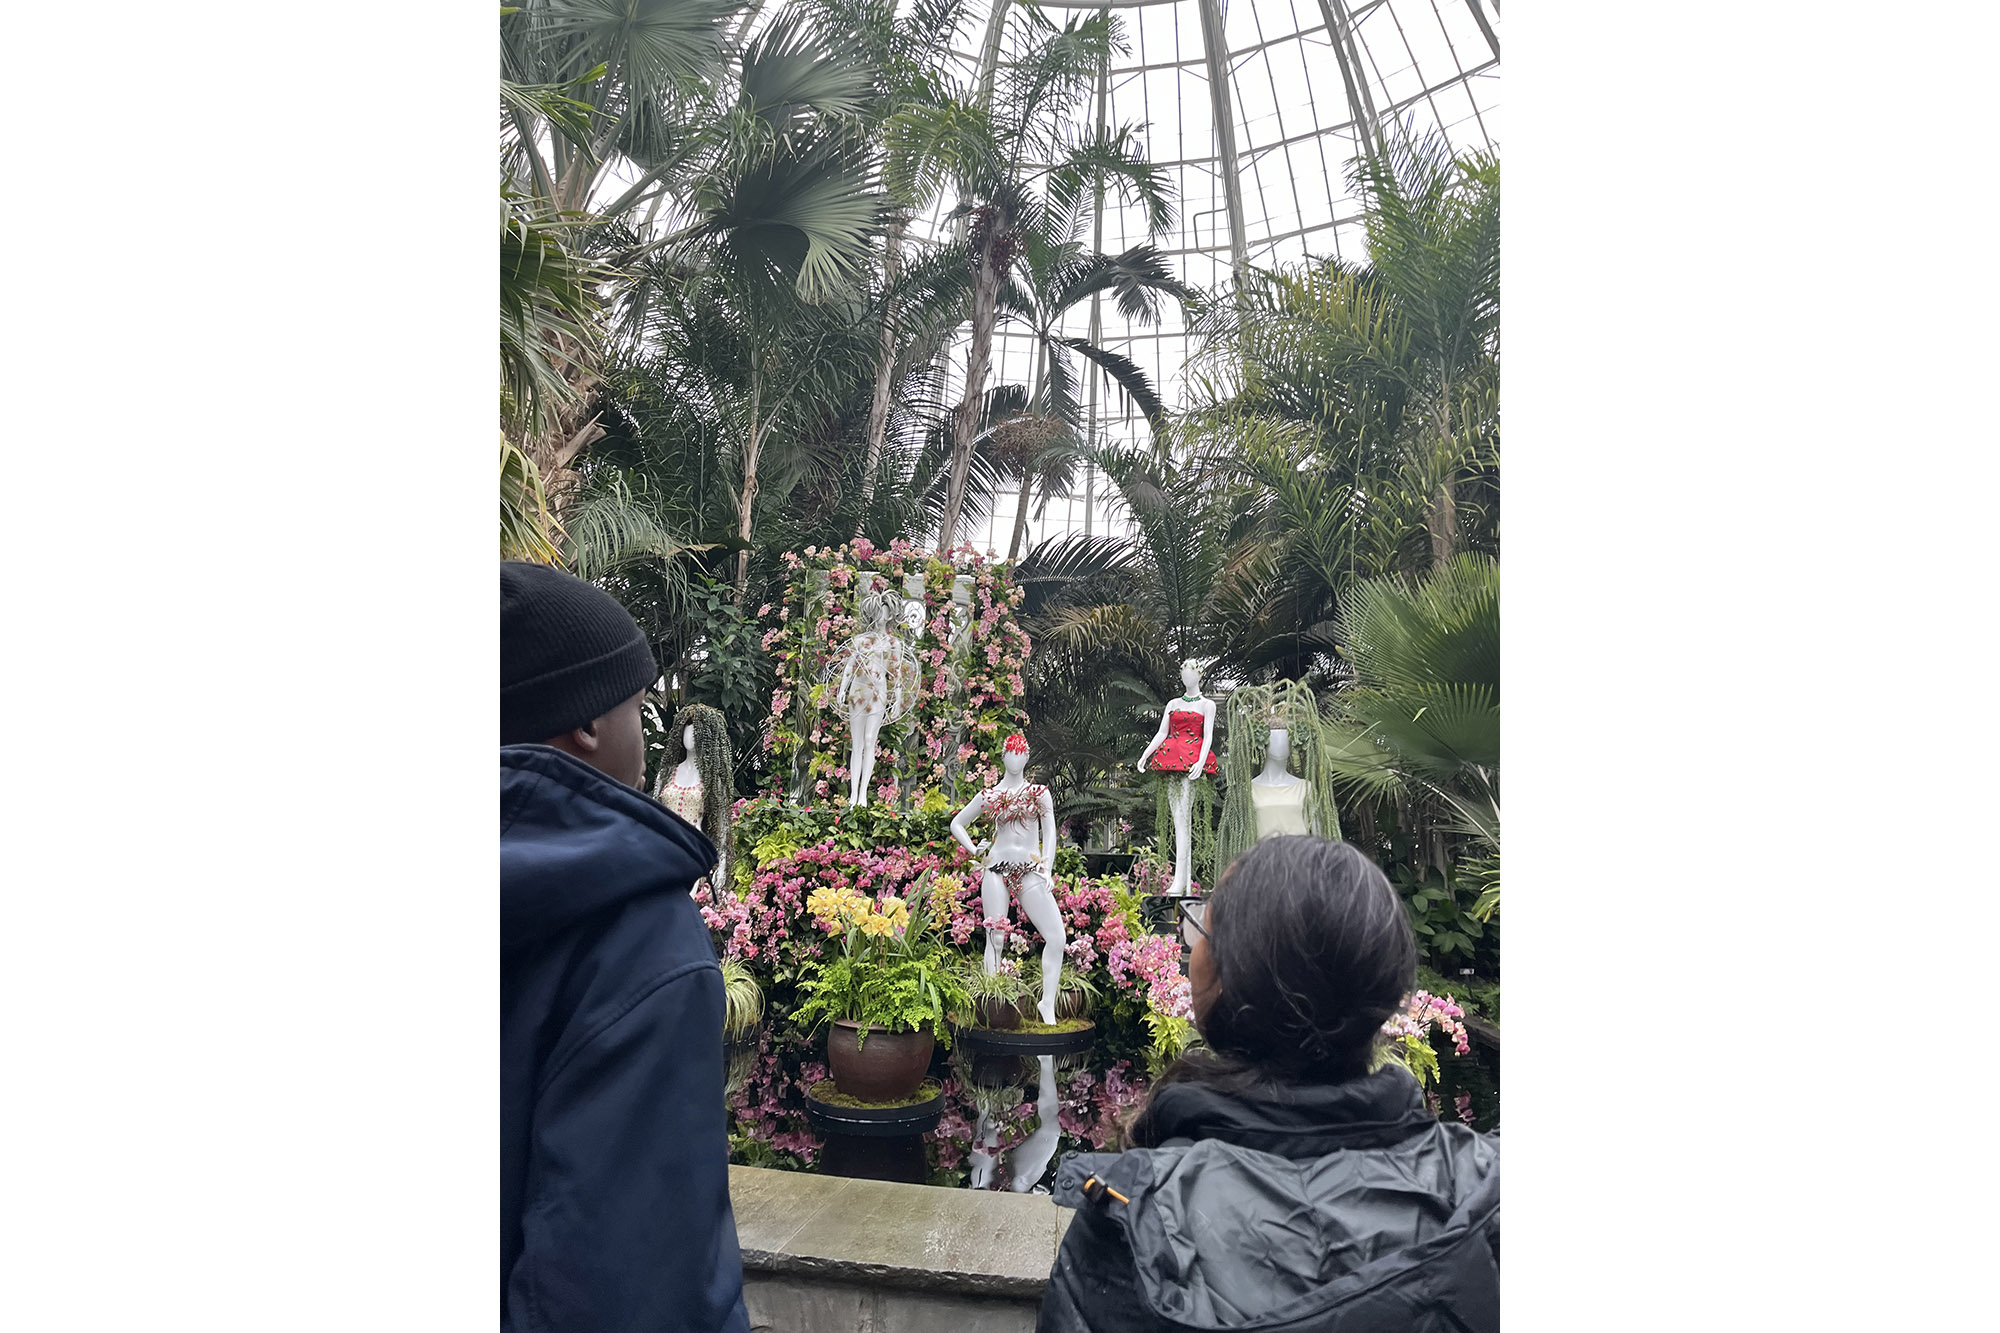 Students in winter clothes explore a lush green conservatory full of mannequins dressed with living plants